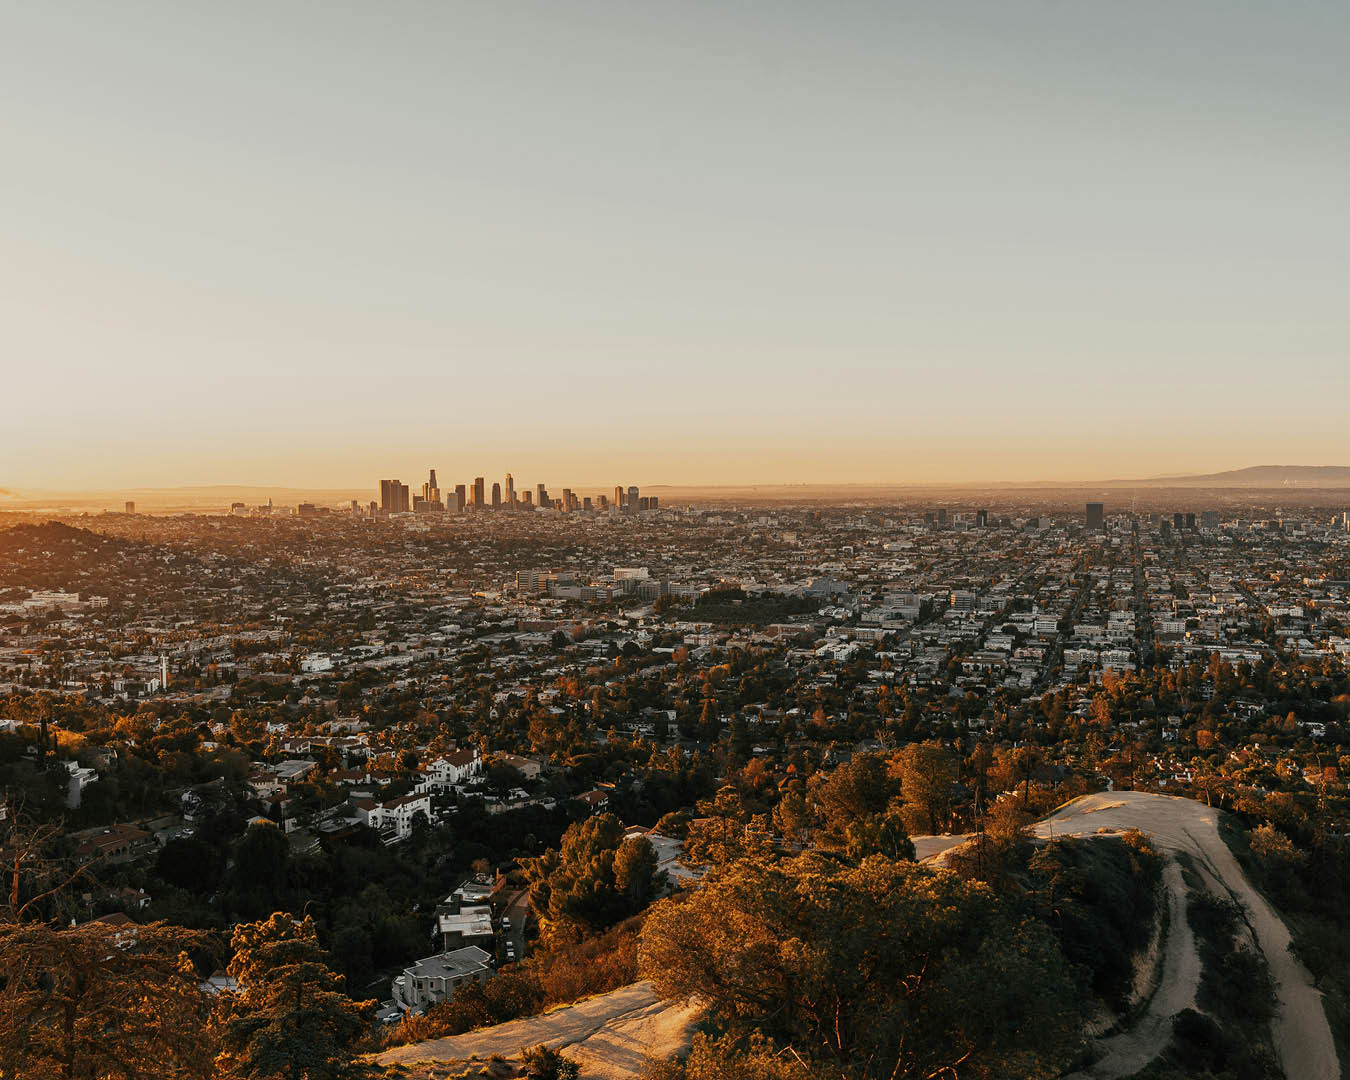 View of the Los Angeles skyline